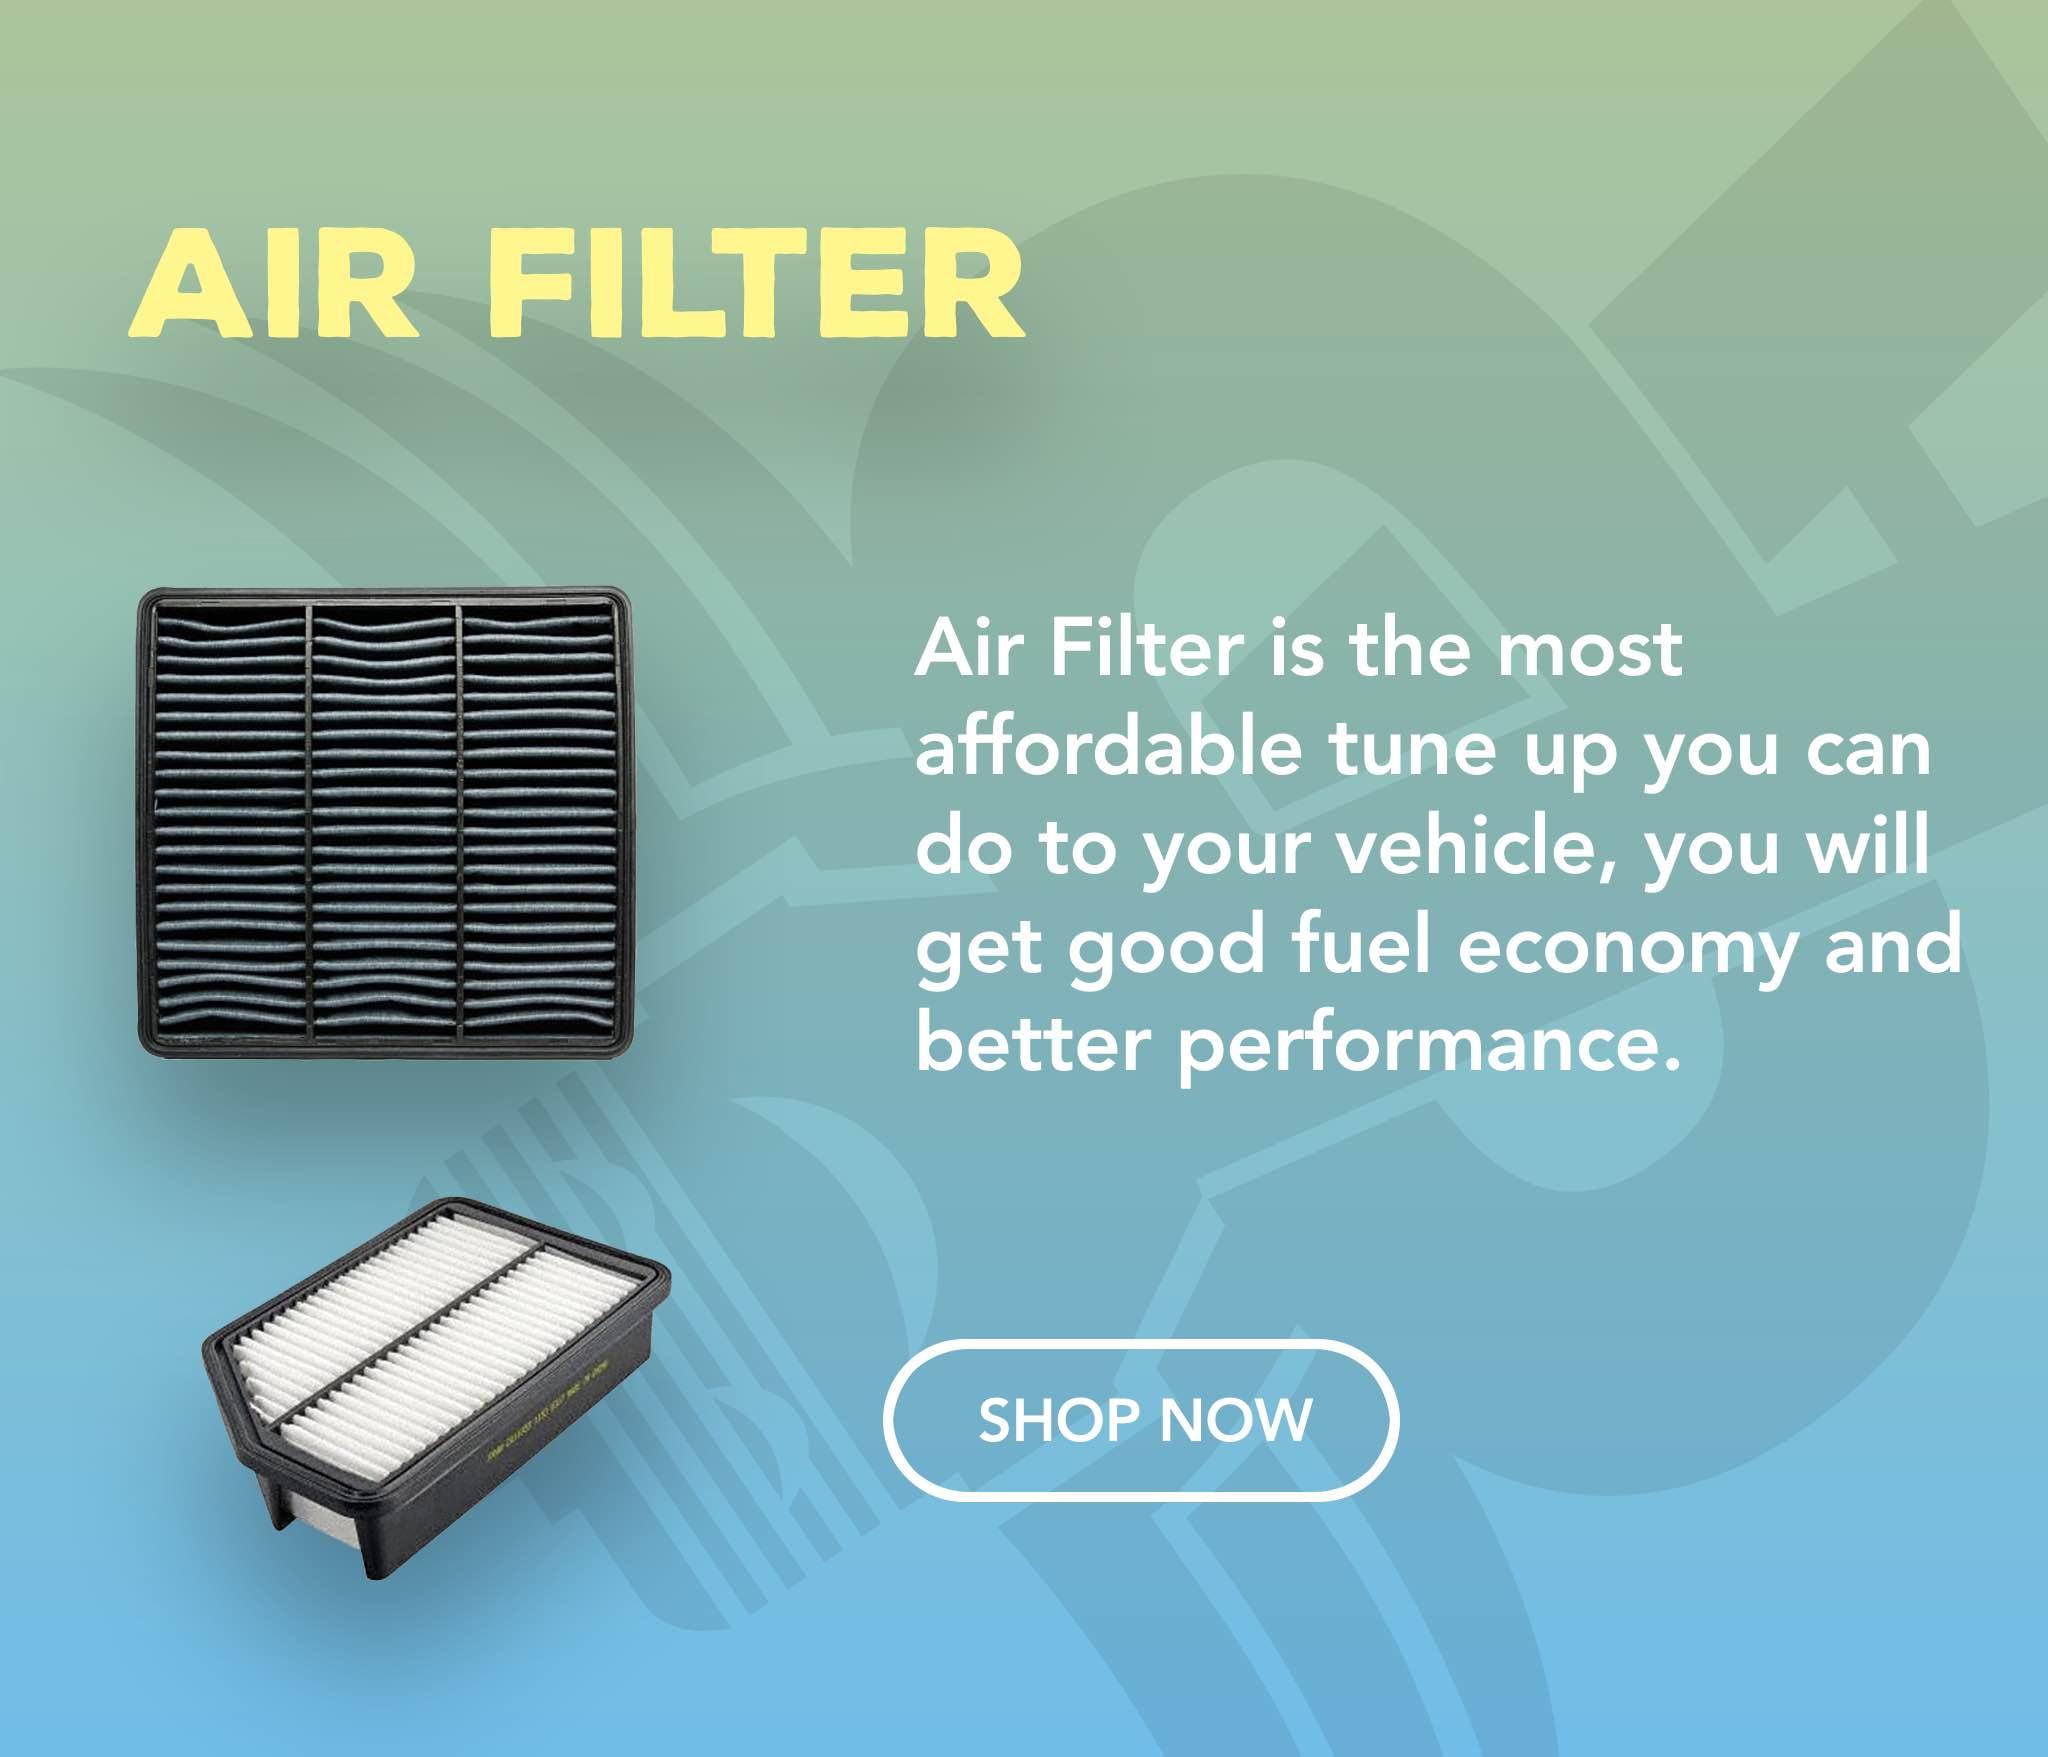 Air Filter is the most affordable tune up you can  do to your vehicle, you will  get good fuel economy and better performance.